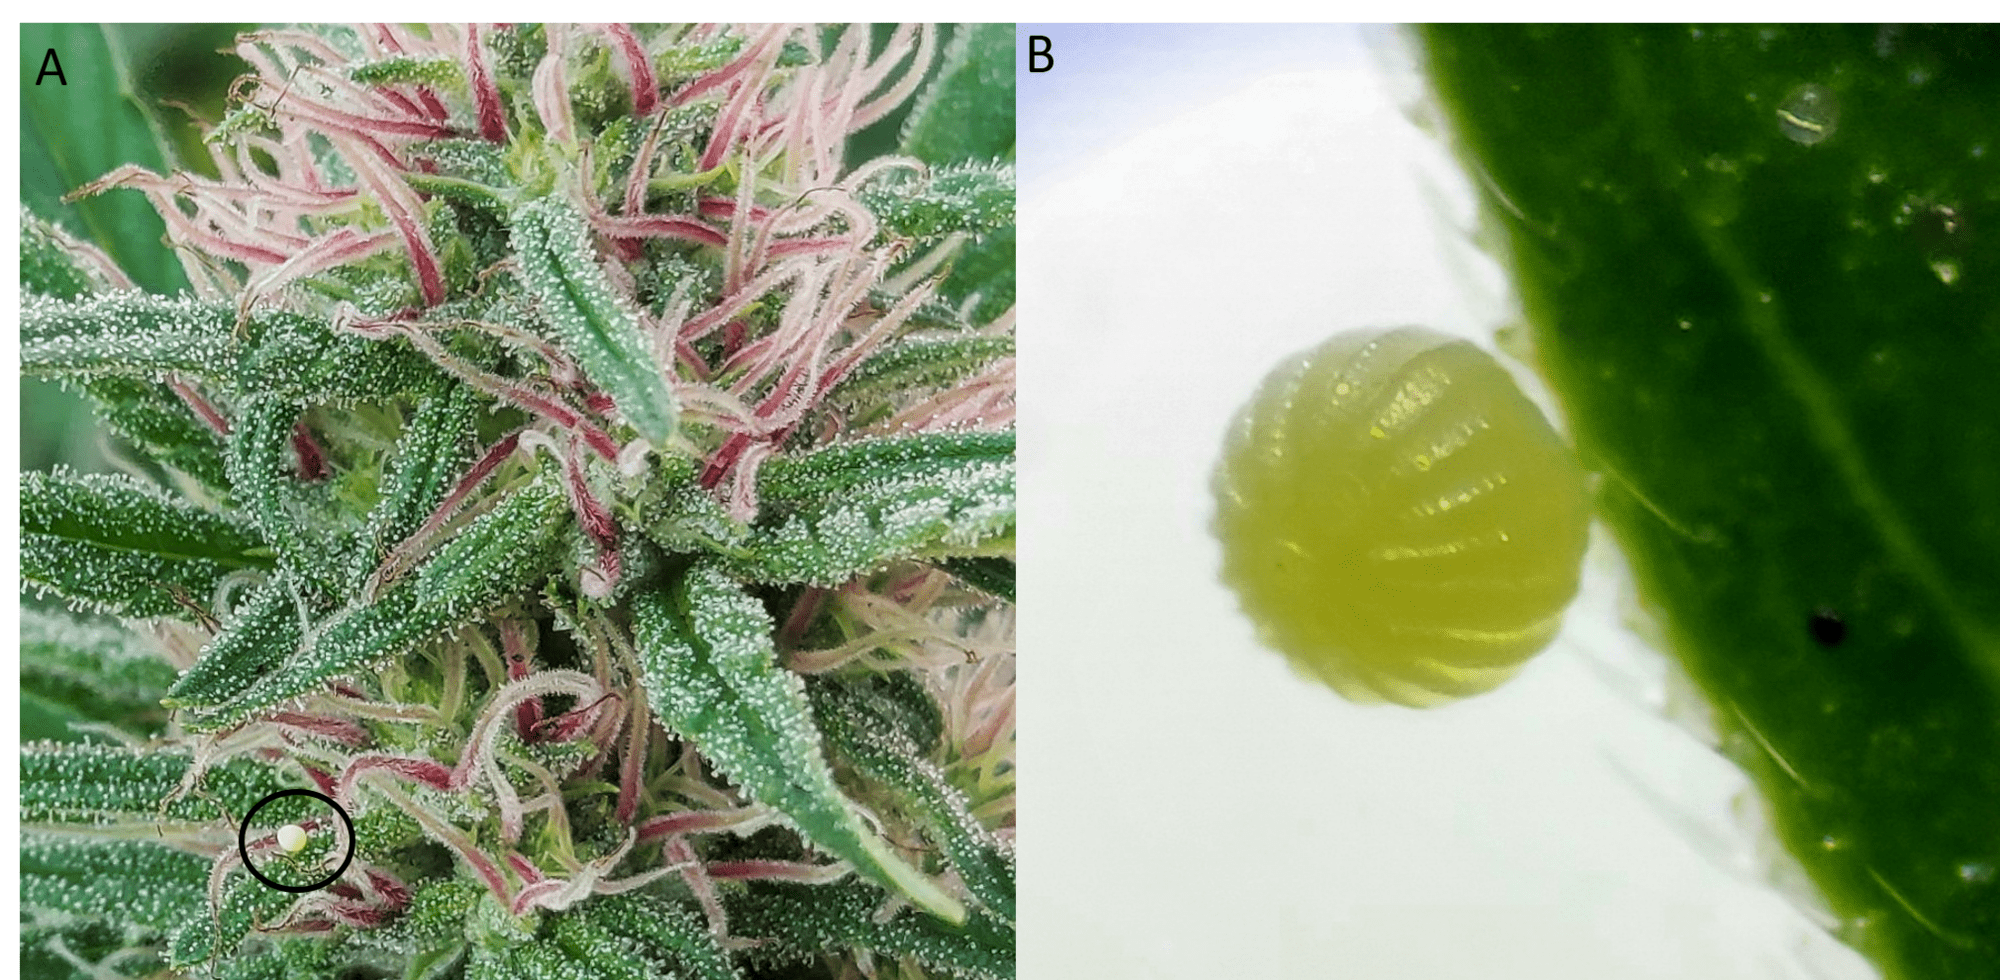 Two photos side by side show an corn earworm egg on a hemp plant and a magnified view of the egg.